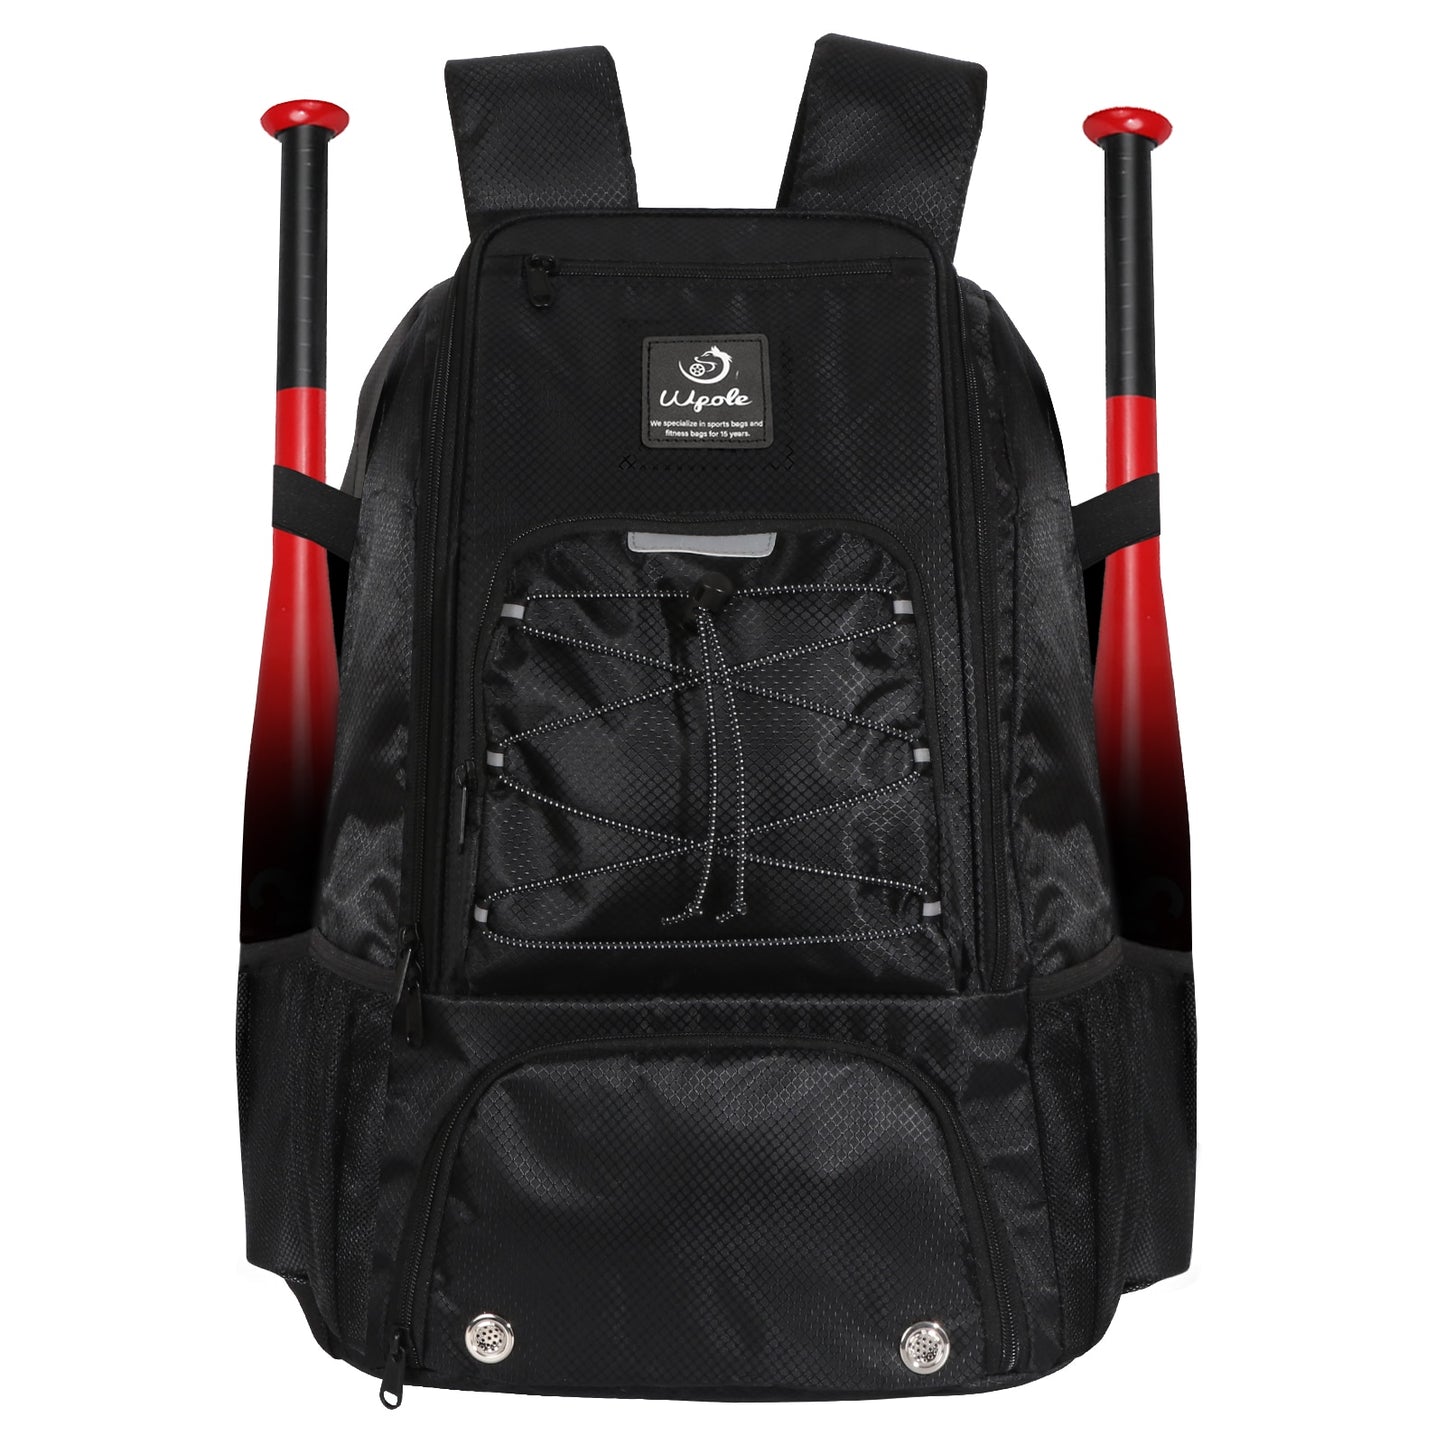 Denuoniss 29LBaseball&amp;Softball Bag,Backpack Bag for Youth Boys and Adult with Fence Hook Hold 2 Tee Ball Bats Batting Glove Gear - kmtell.com